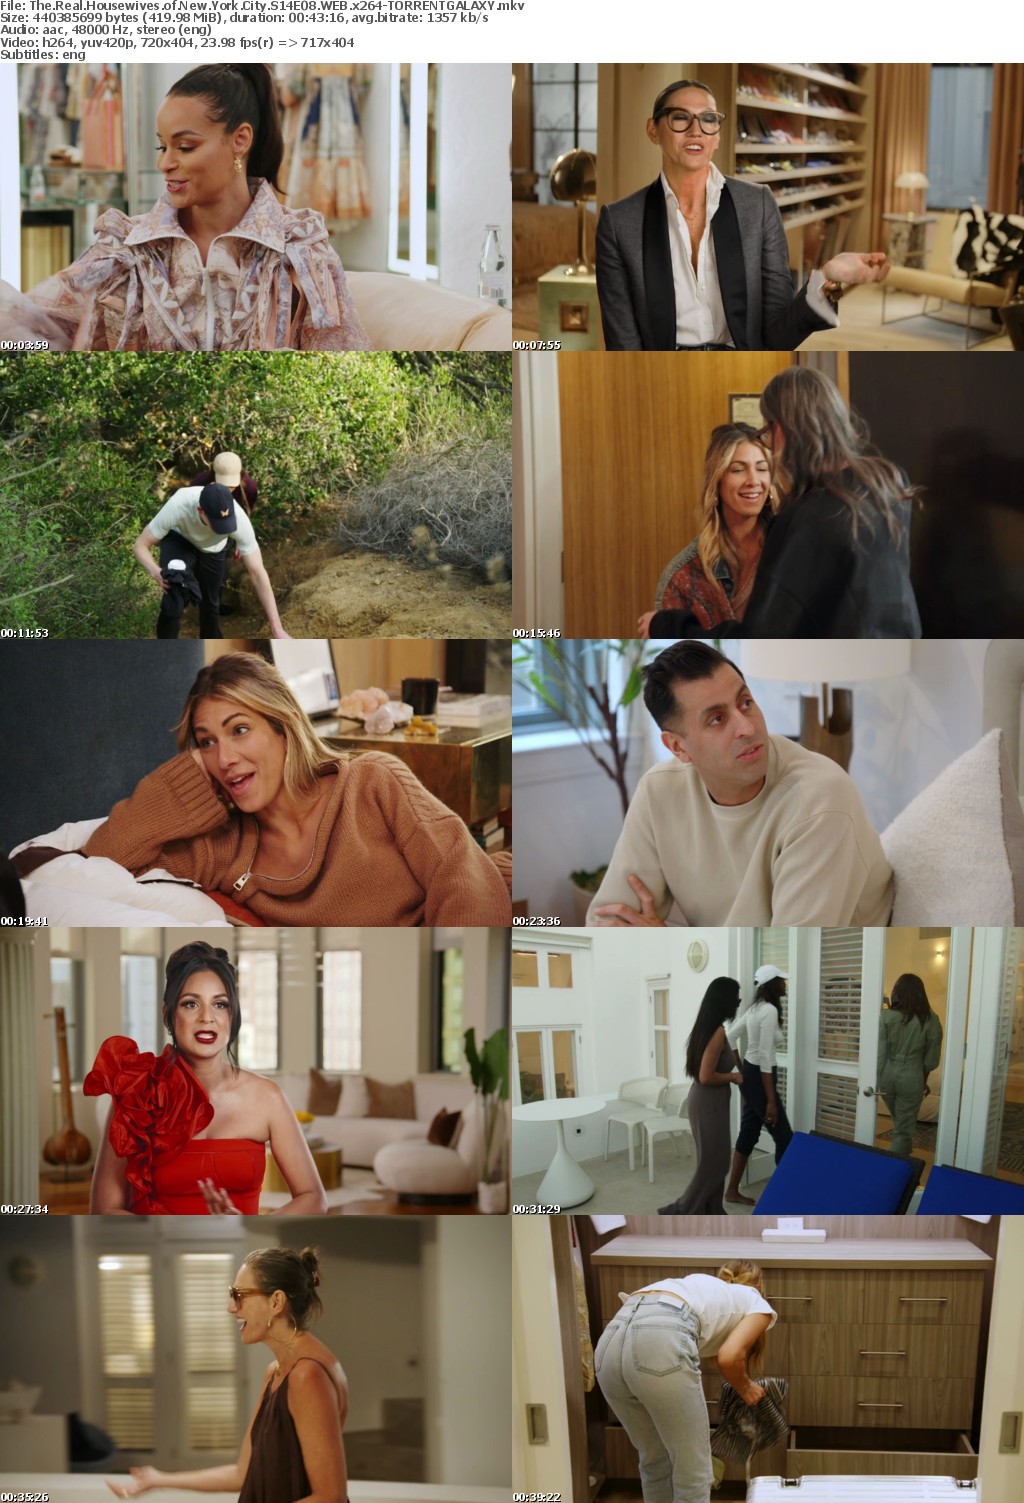 The Real Housewives of New York City S14E08 WEB x264-GALAXY